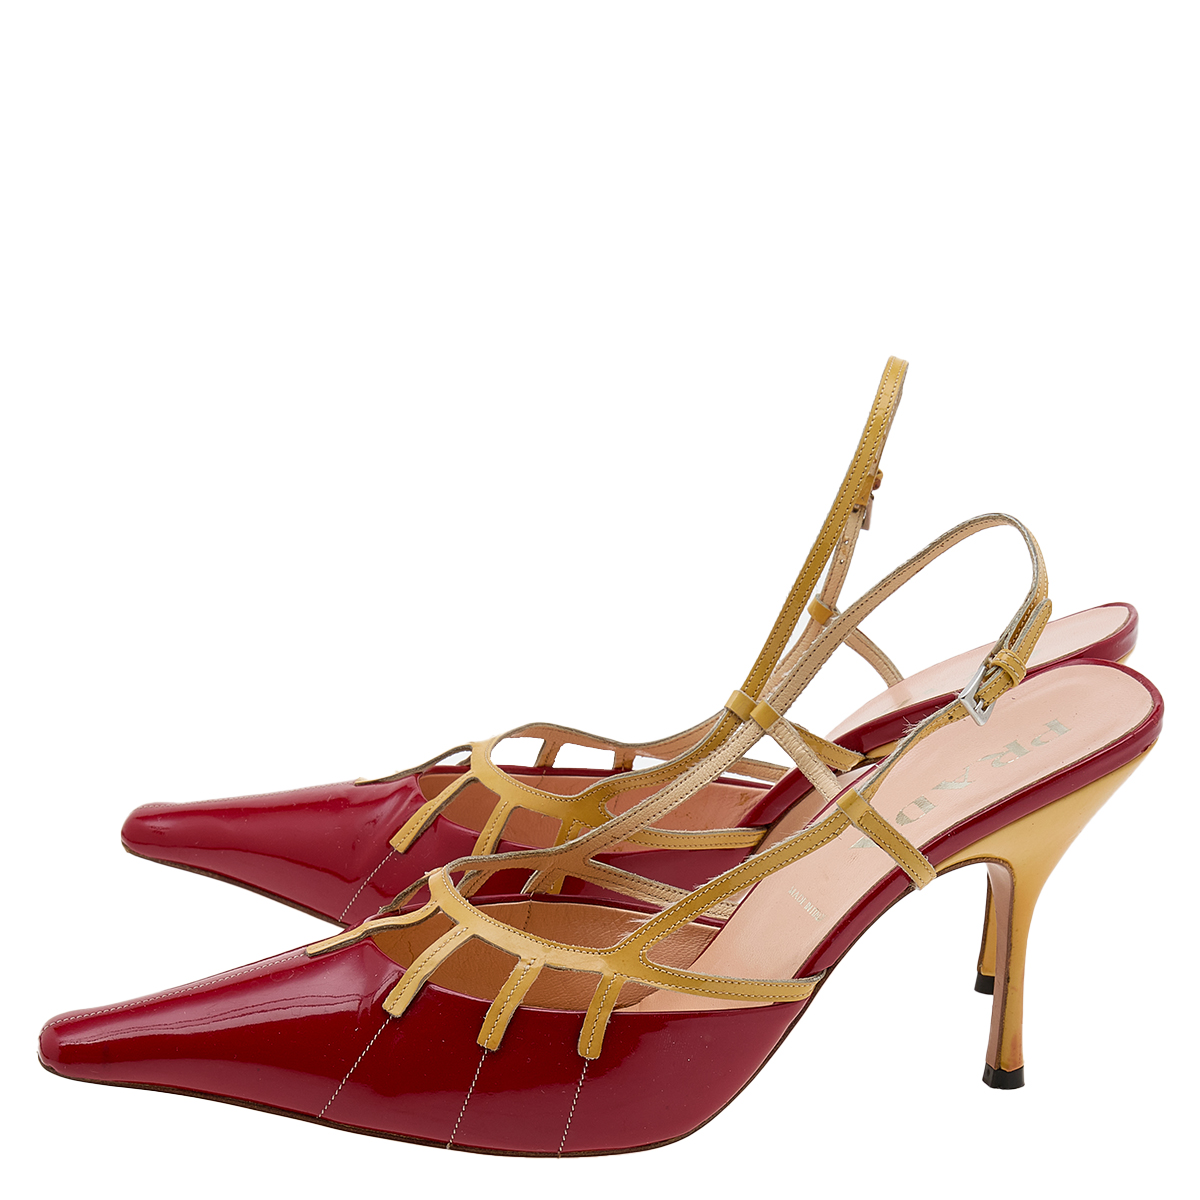 Prada Red/Yellow Patent Leather Slingback Sandals Size 39.5